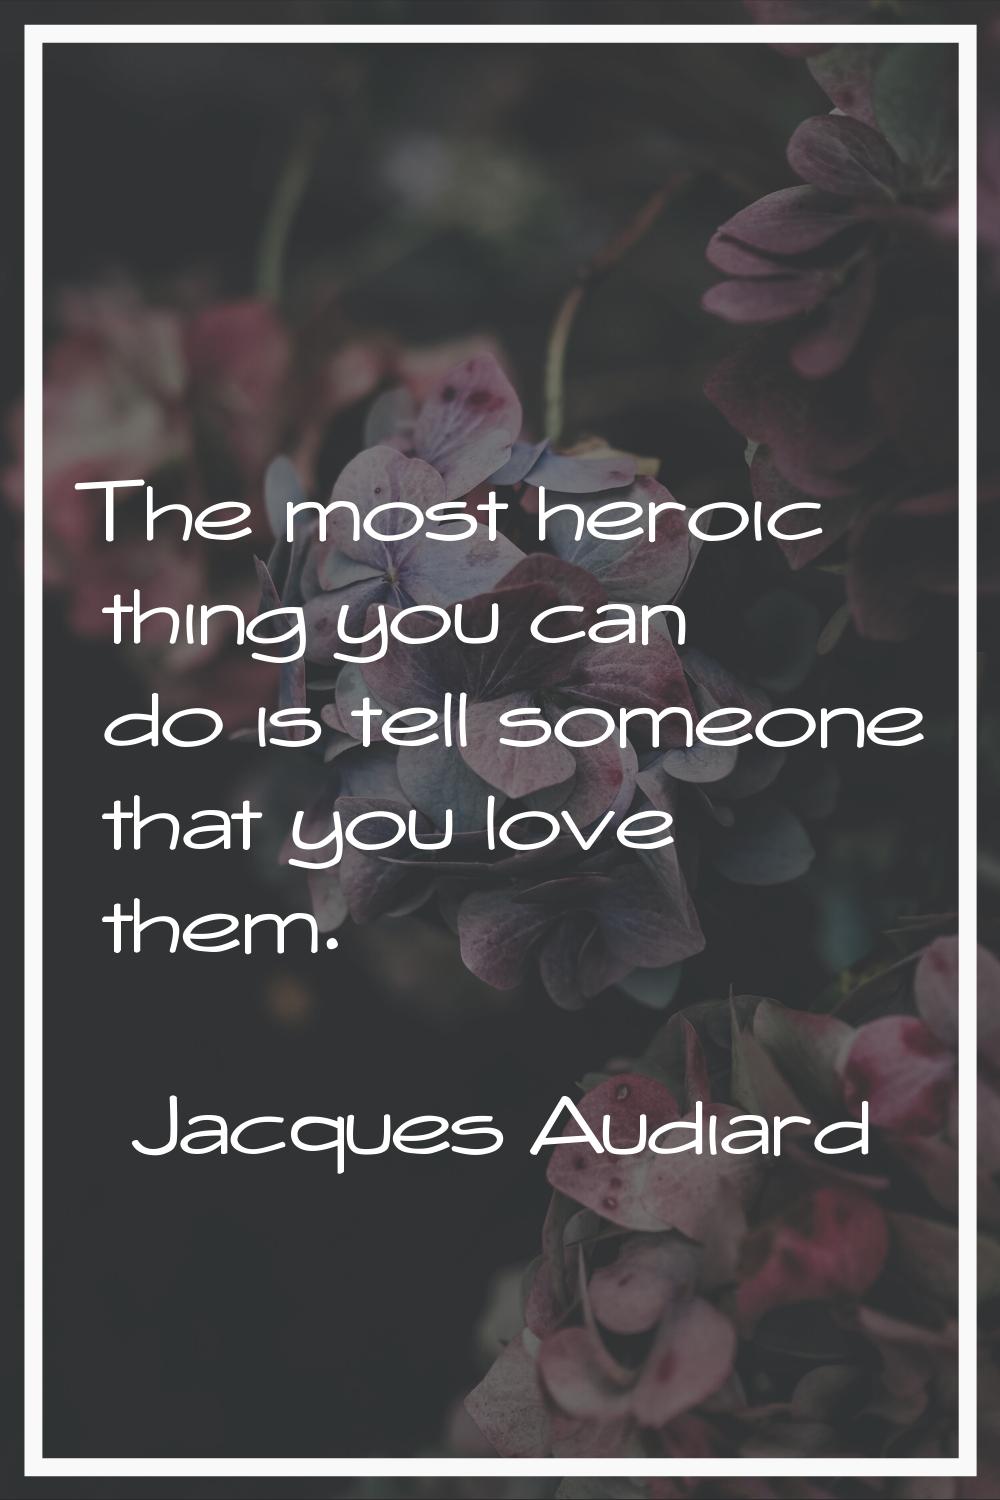 The most heroic thing you can do is tell someone that you love them.